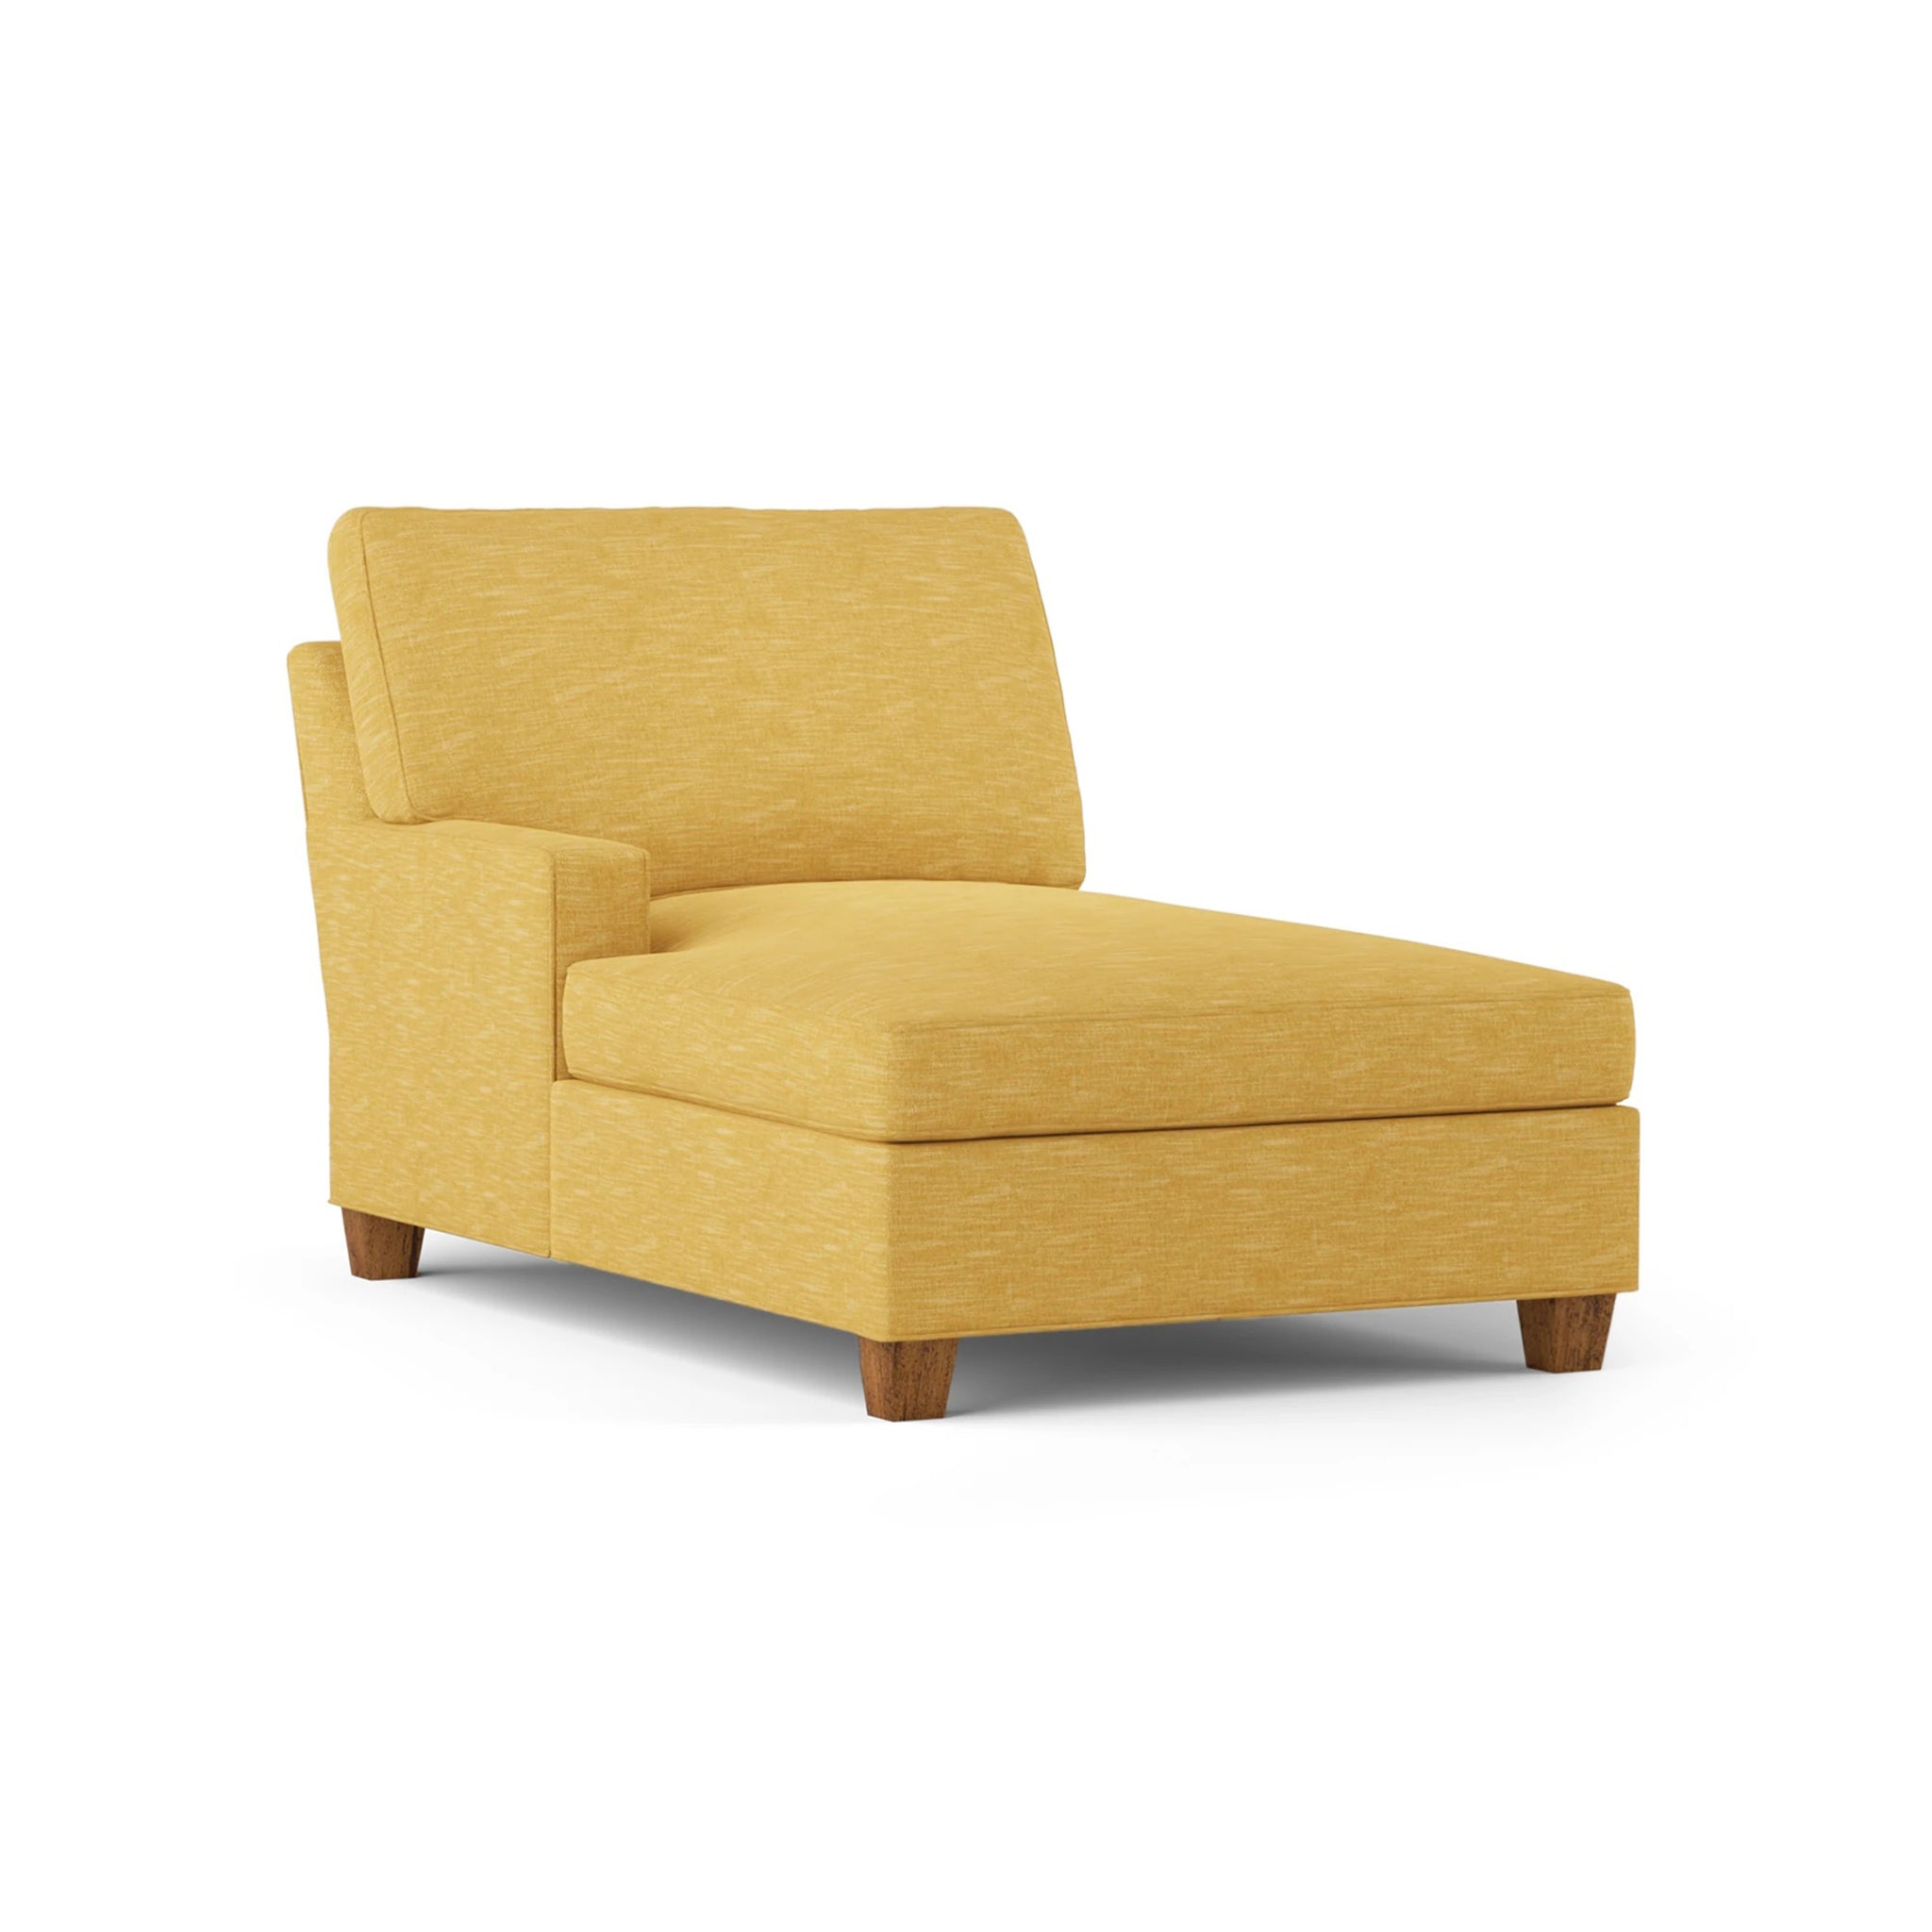 The Crag House Collection - LAF Chaise